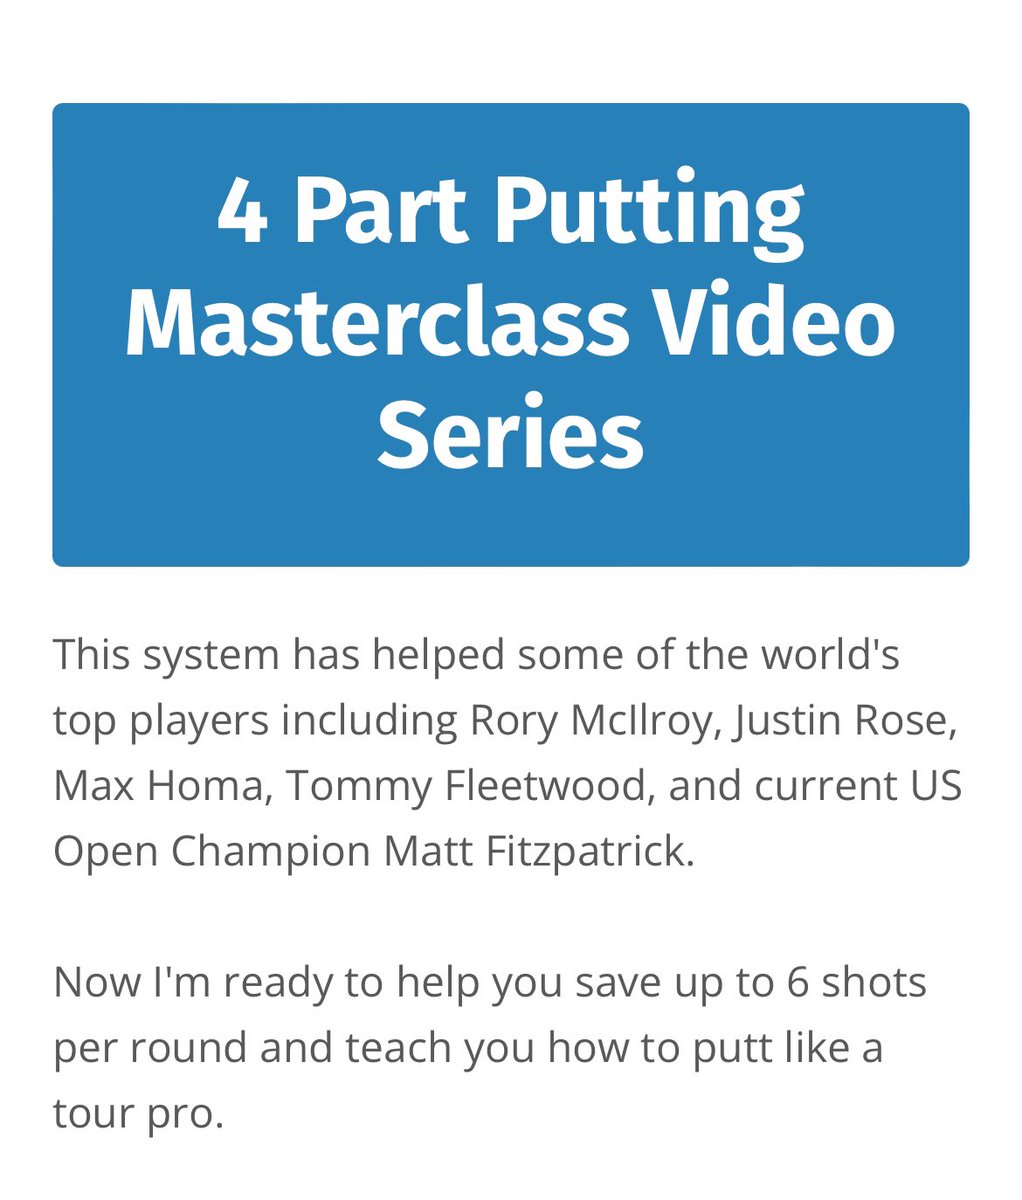 🏌️‍♂️Putting masterclass … 

I recently signed up to receive content from @KenyonPutting 

His 2nd masterclass just hit my mailbox. These are excellent and will def help my putting this summer.

Check out Phil’s socials and website 

philkenyonputting.com/about

#LoveGolf